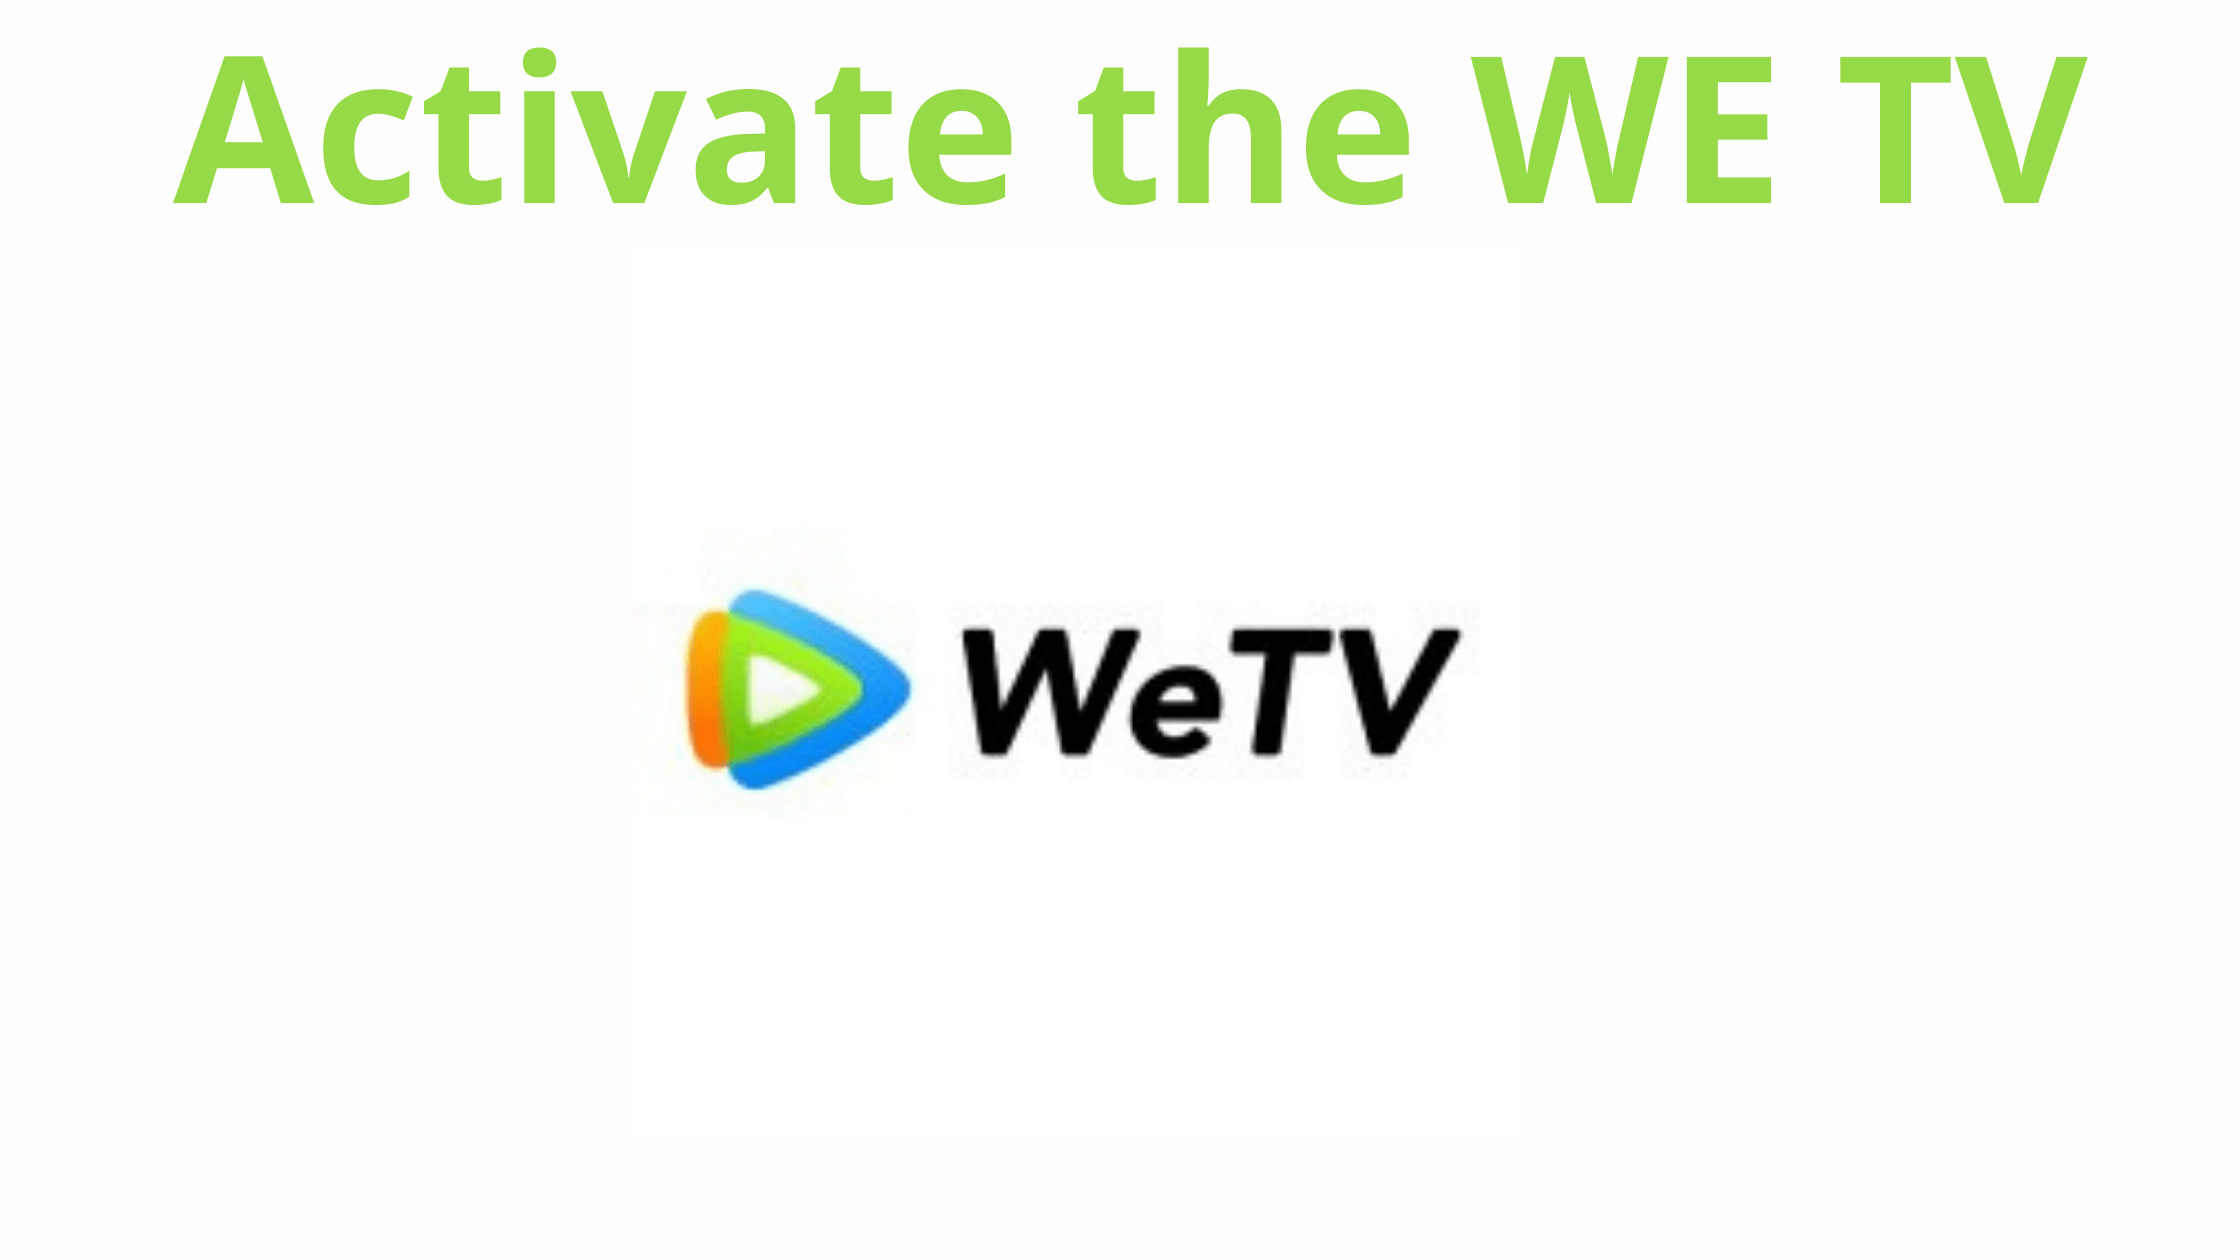 Activate the WE TV